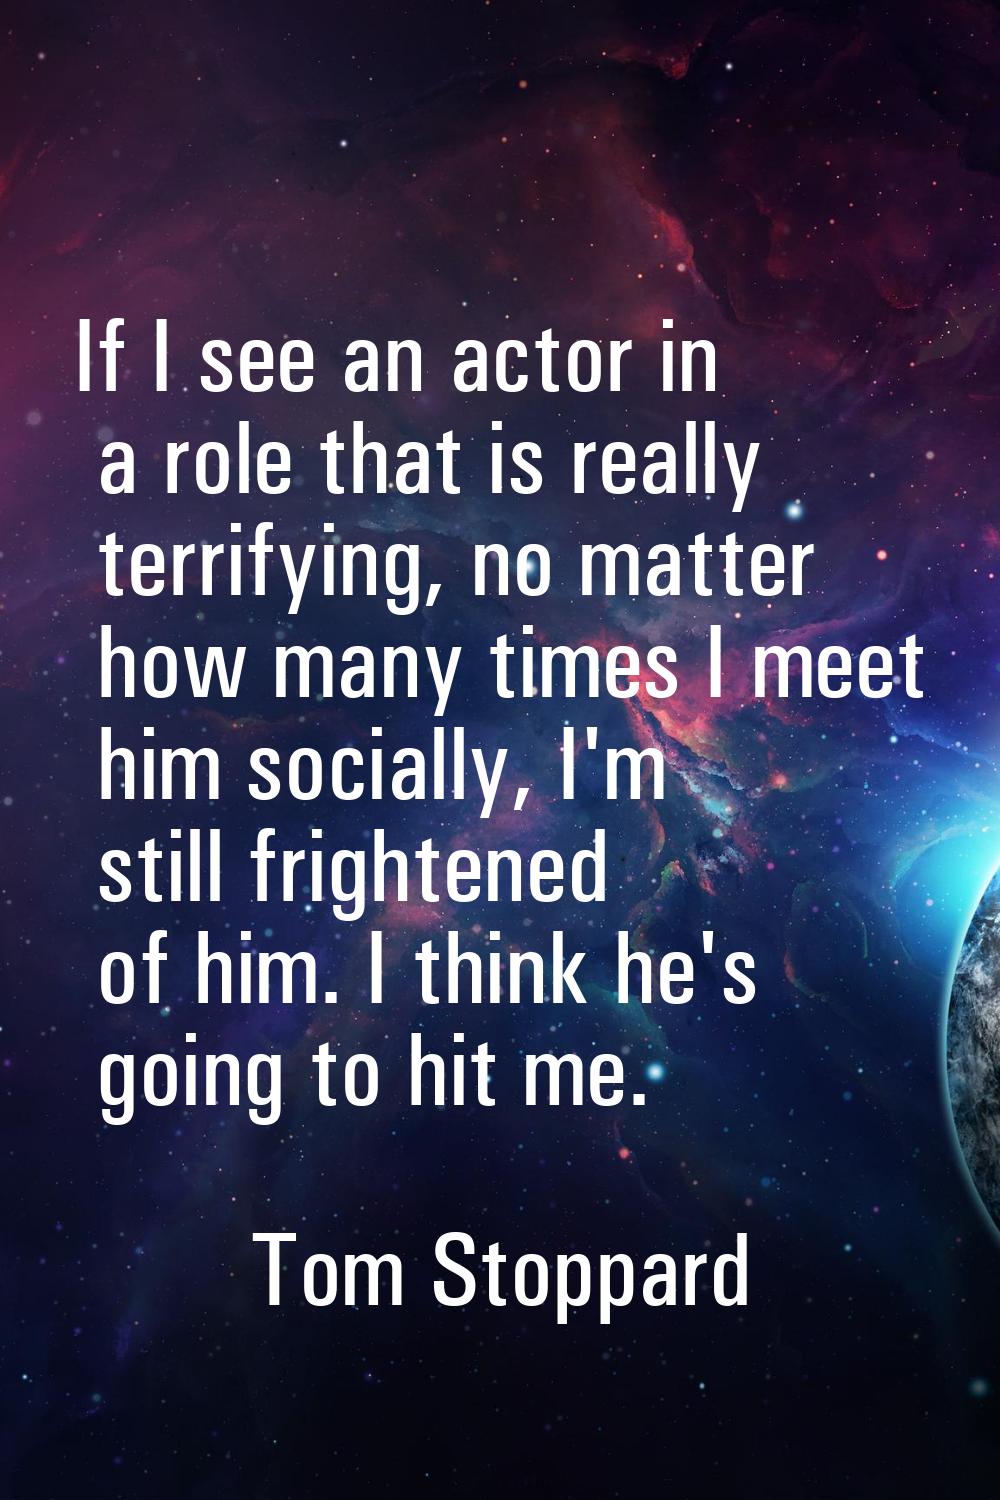 If I see an actor in a role that is really terrifying, no matter how many times I meet him socially